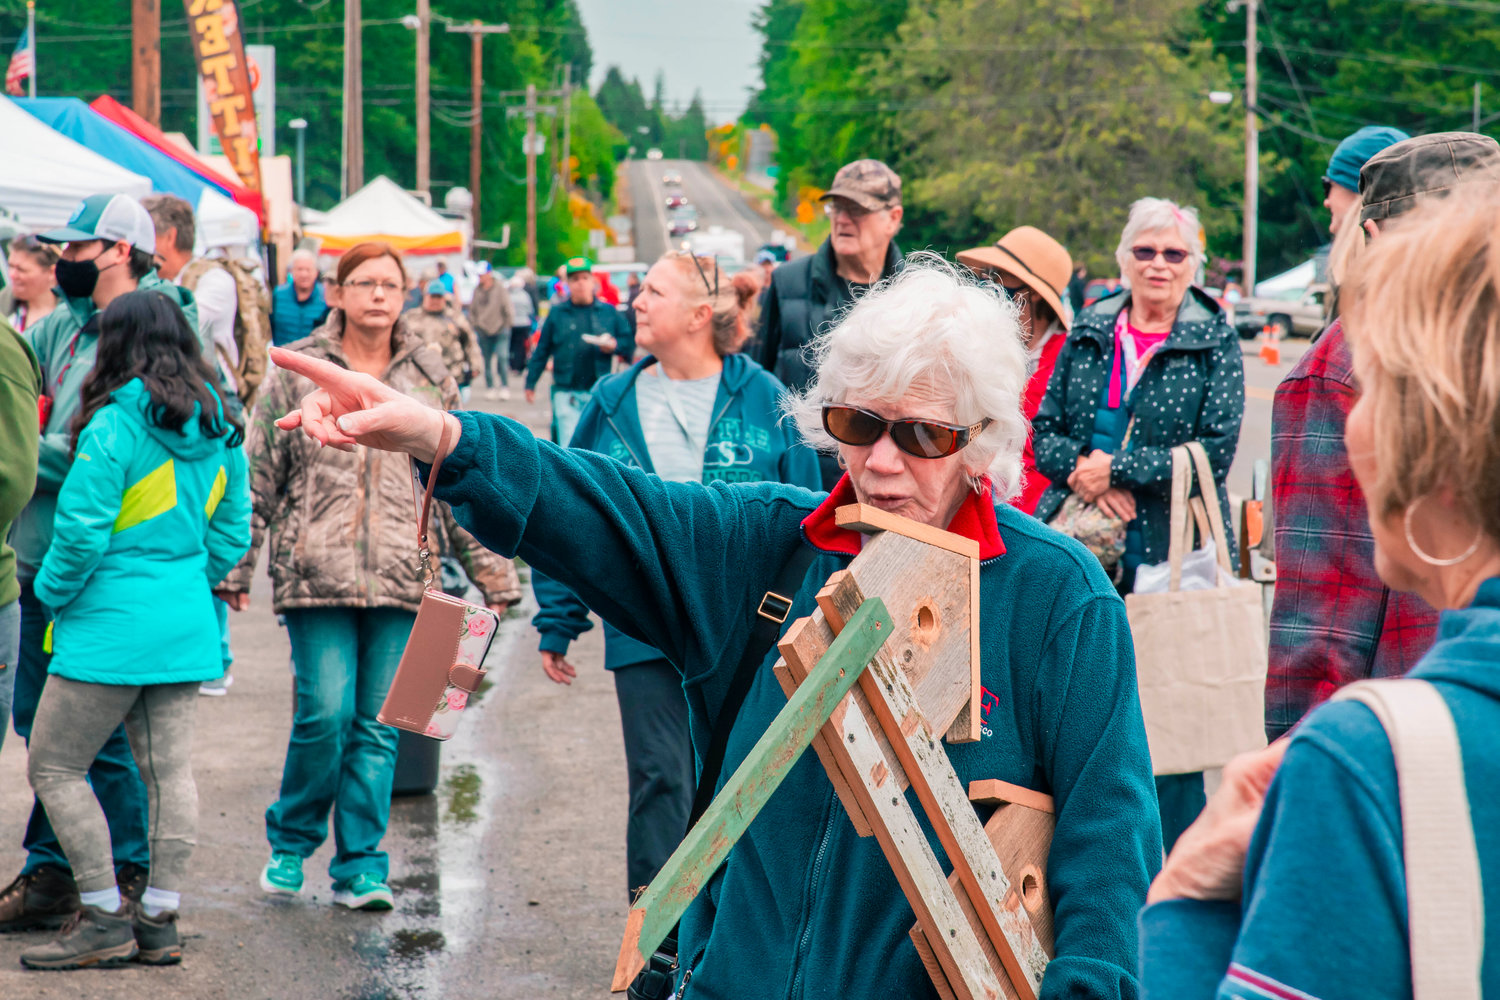 Dixie Jasinto points to food vendors after making a purchase at the Packwood Flea Market on Friday.